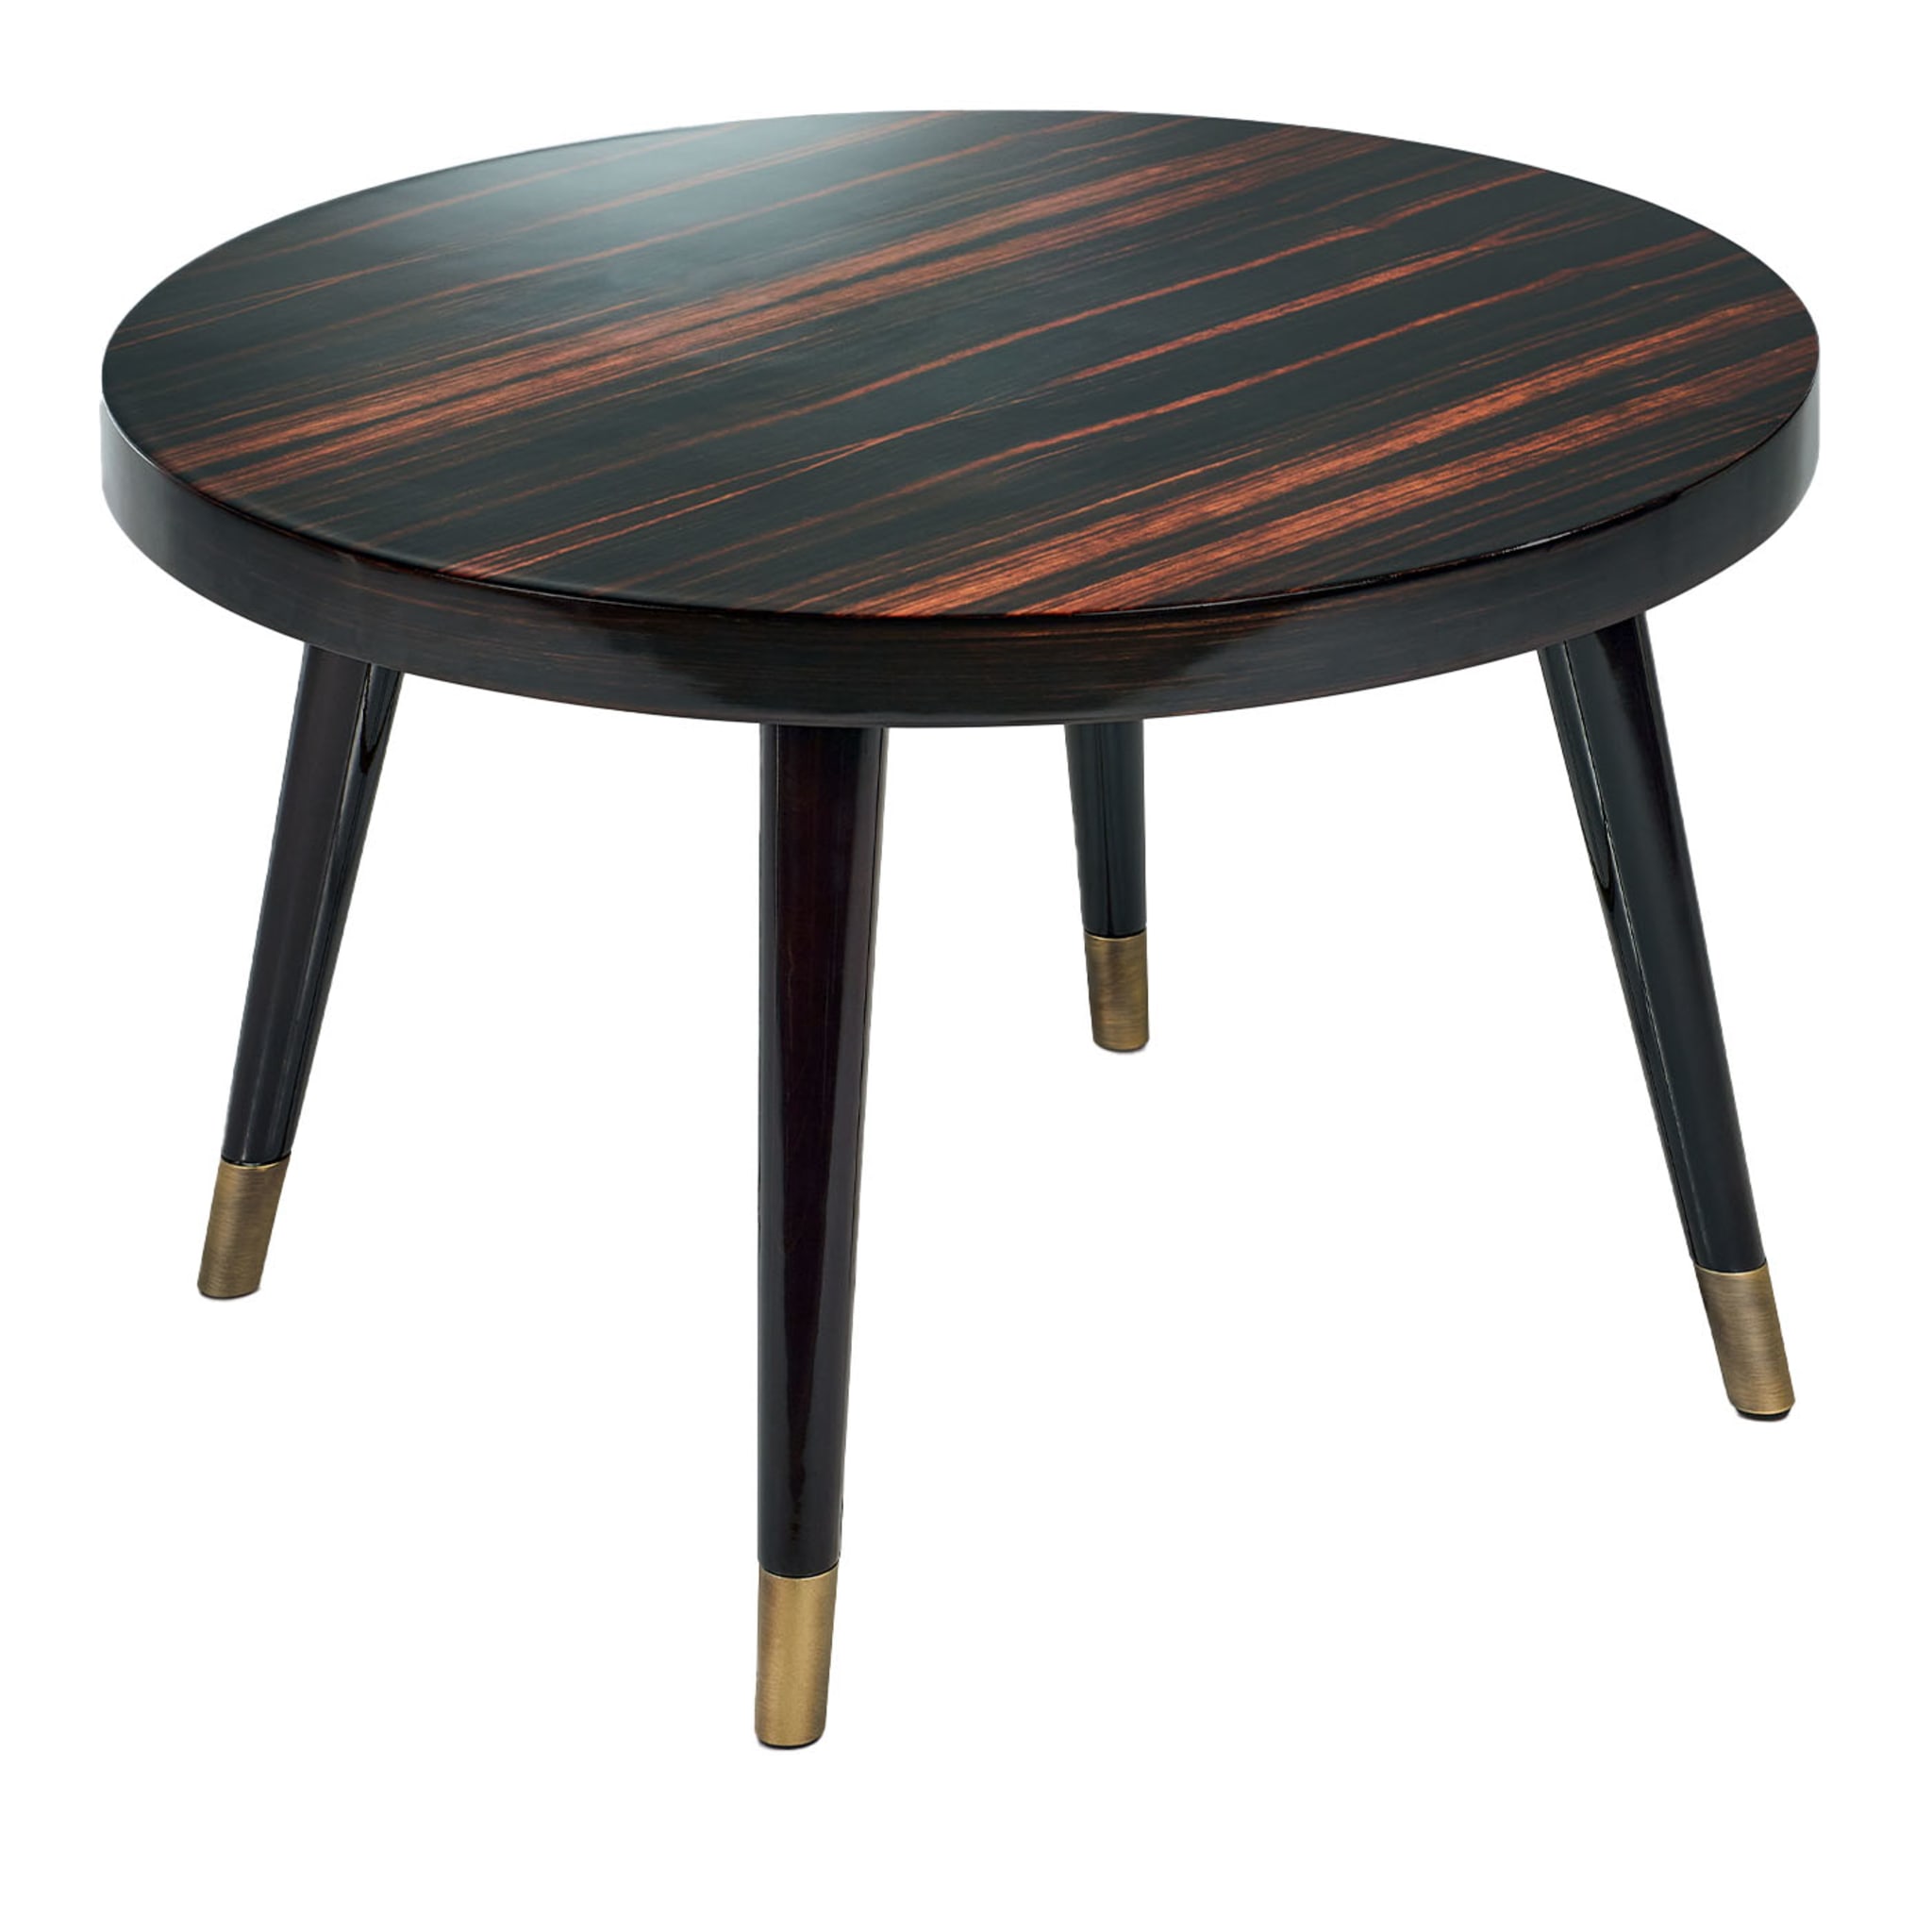 Peggy dark round side table 60 cm - Main view